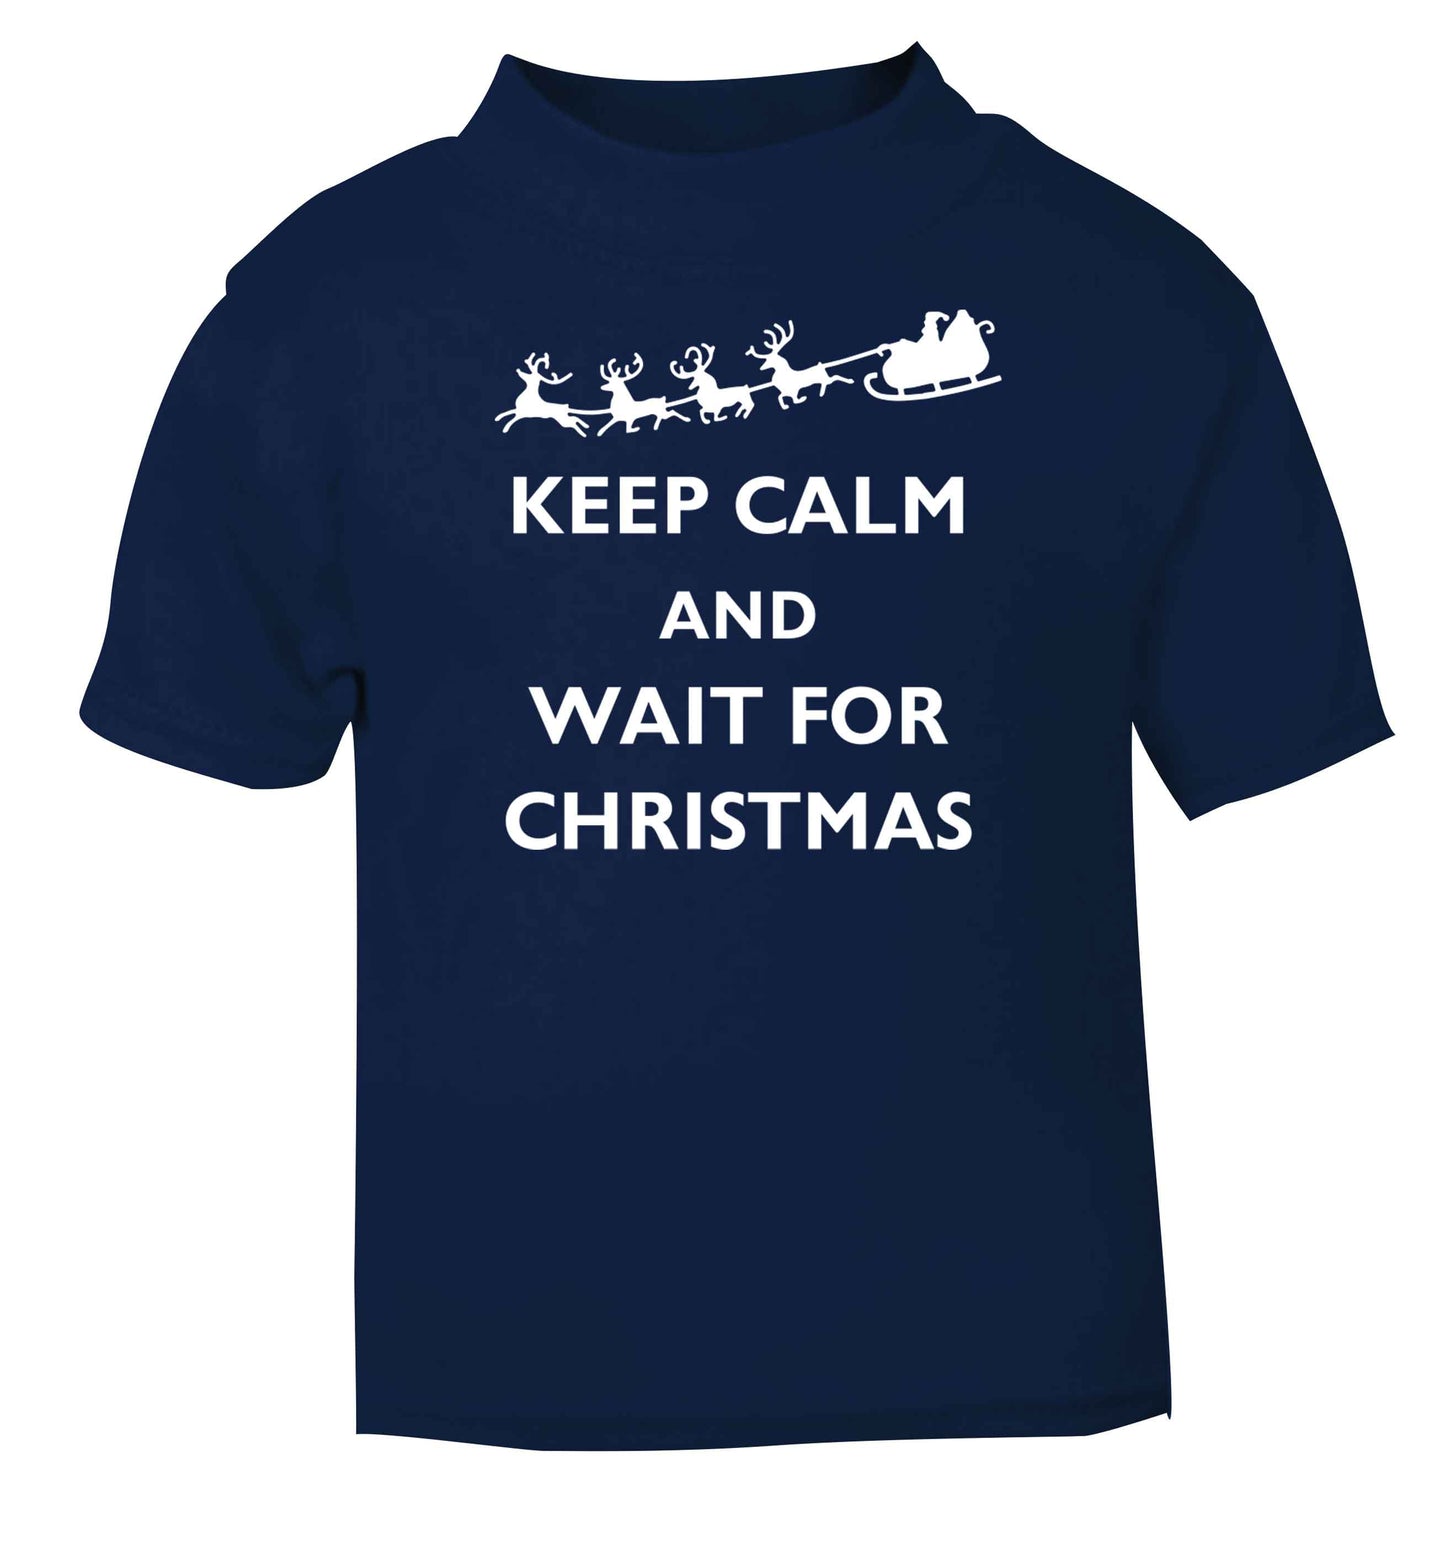 Keep calm and wait for Christmas navy baby toddler Tshirt 2 Years